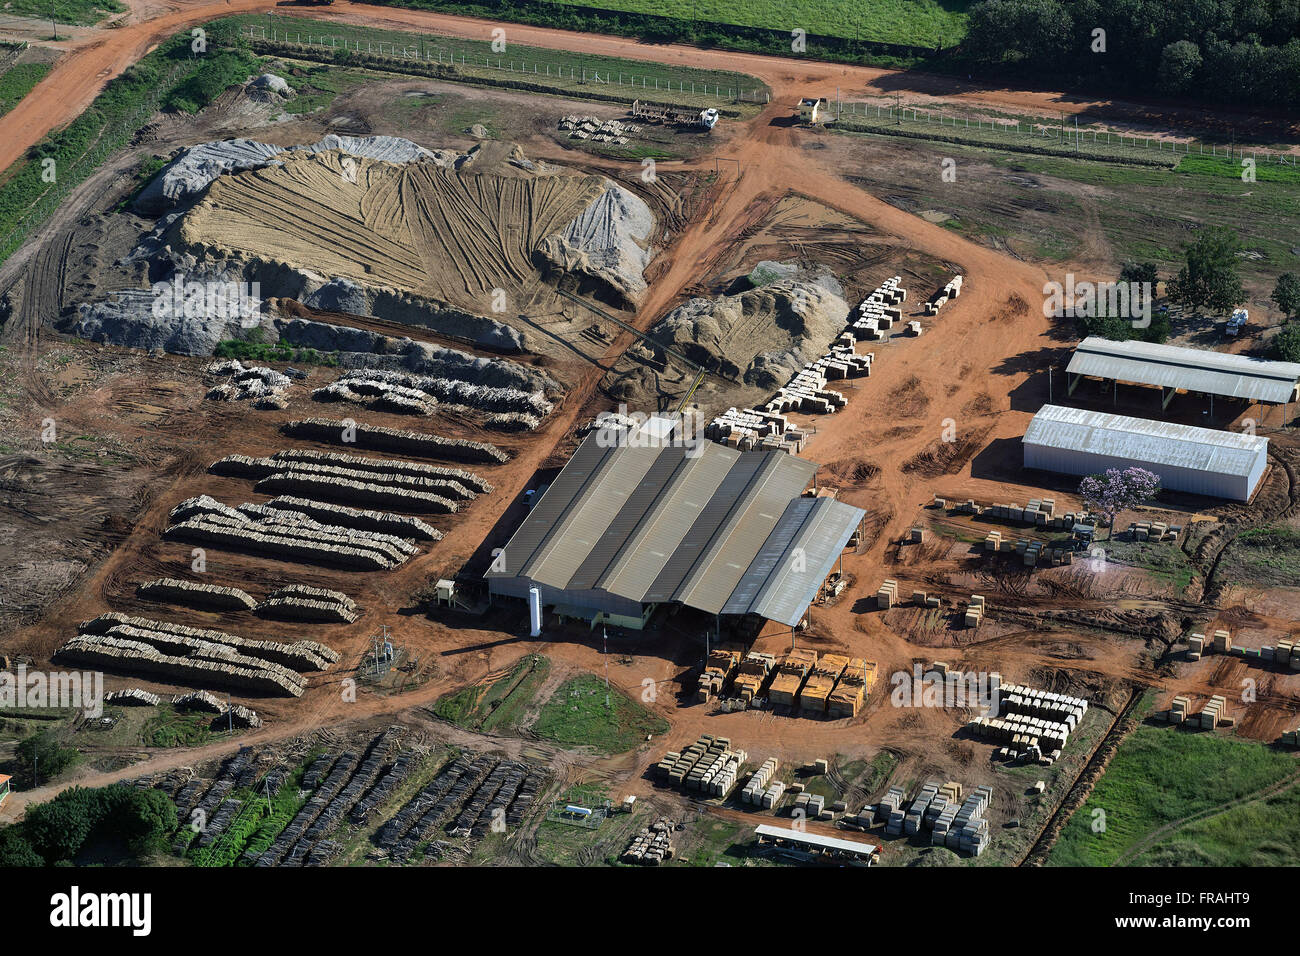 Aerial view of the timber industry to use teak wood Stock Photo